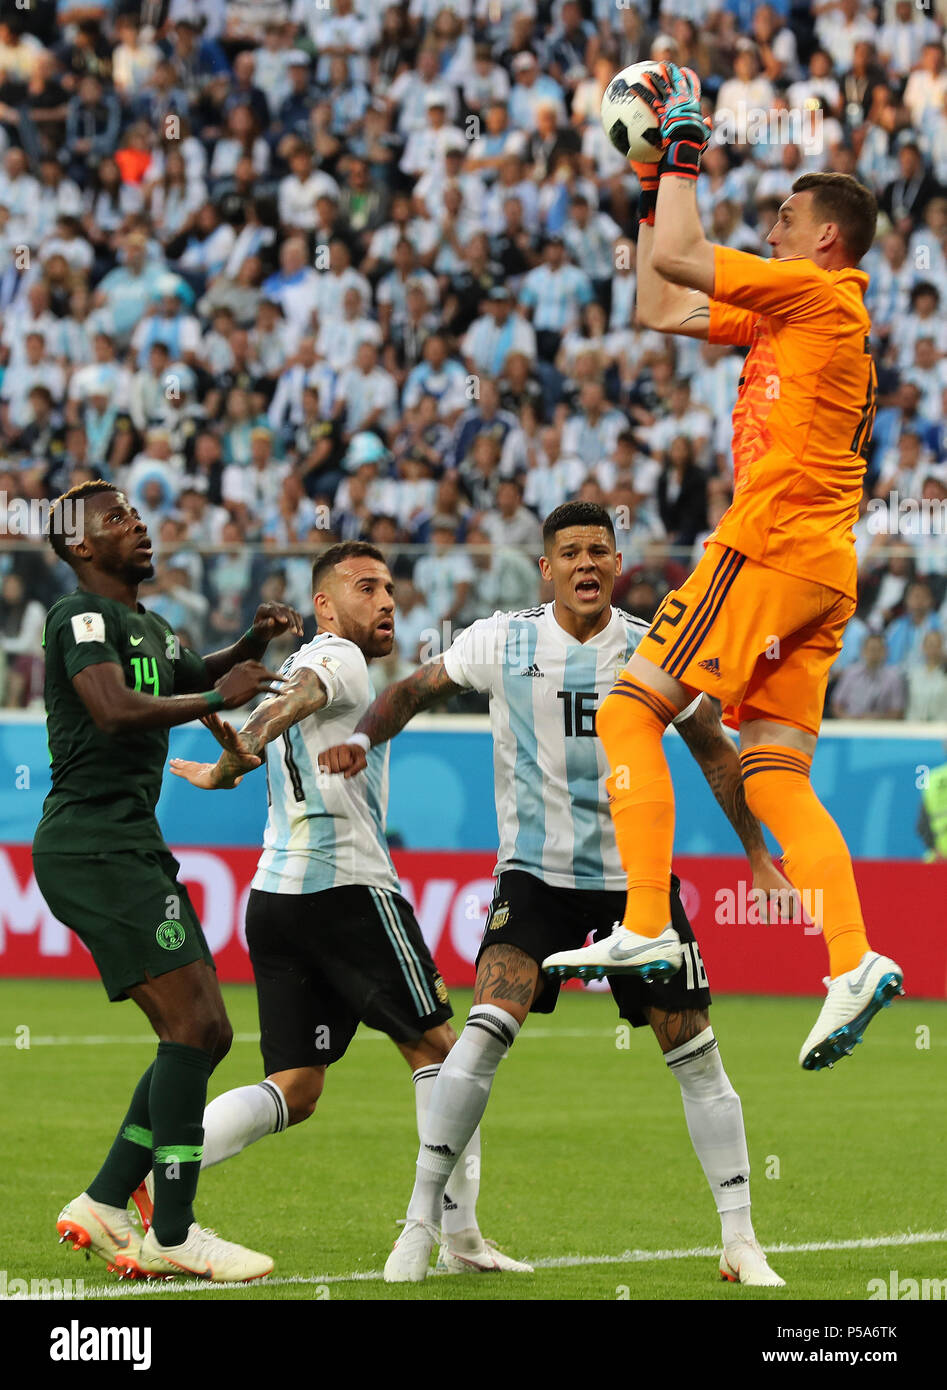 Saint Petersburg, Russia. 26th June, 2018. Goalkeeper Franco Armani (top)  of Argentina defends during the 2018 FIFA World Cup Group D match between  Nigeria and Argentina in Saint Petersburg, Russia, June 26,